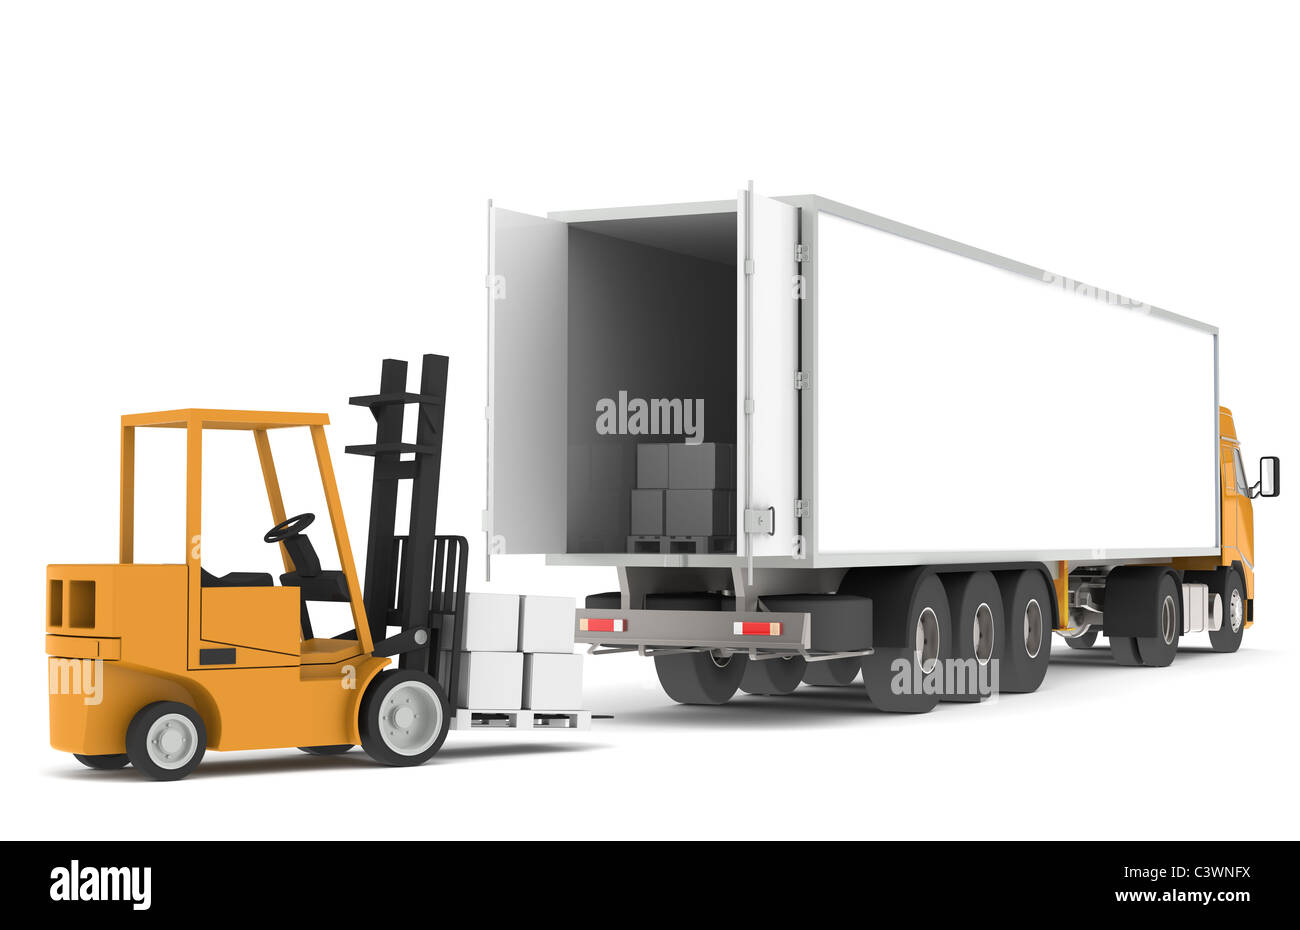 Loading the Truck. Forklift loading a Trailer. Part of warehouse series. Stock Photo